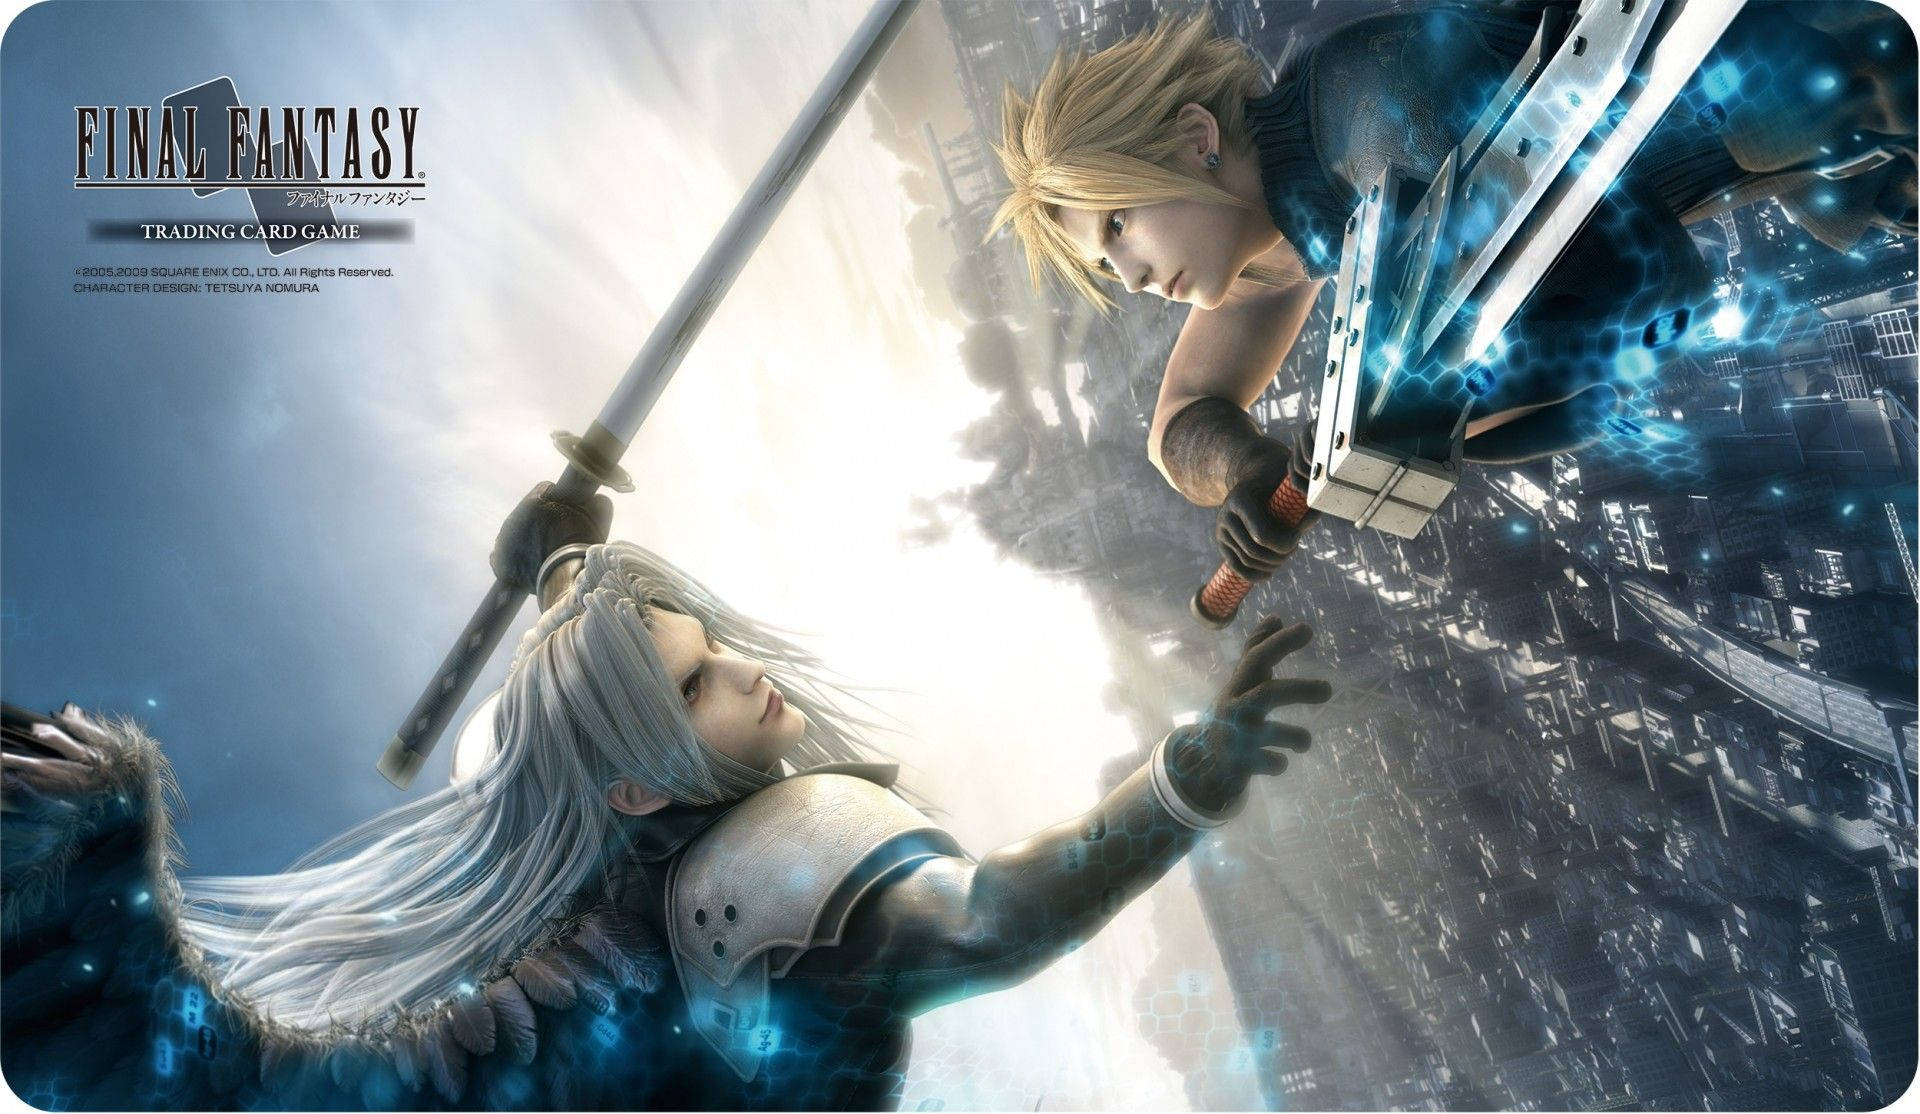 Sephiroth Against Cloud Strife Background